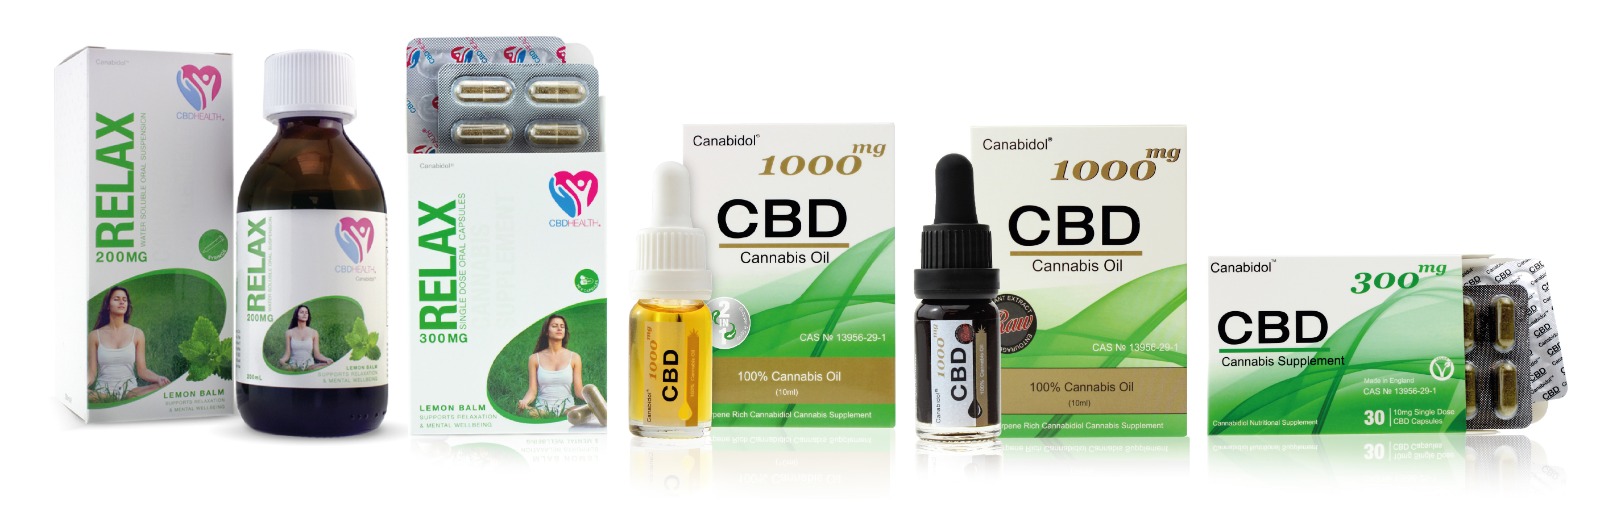 British Cannabis: a collection of products